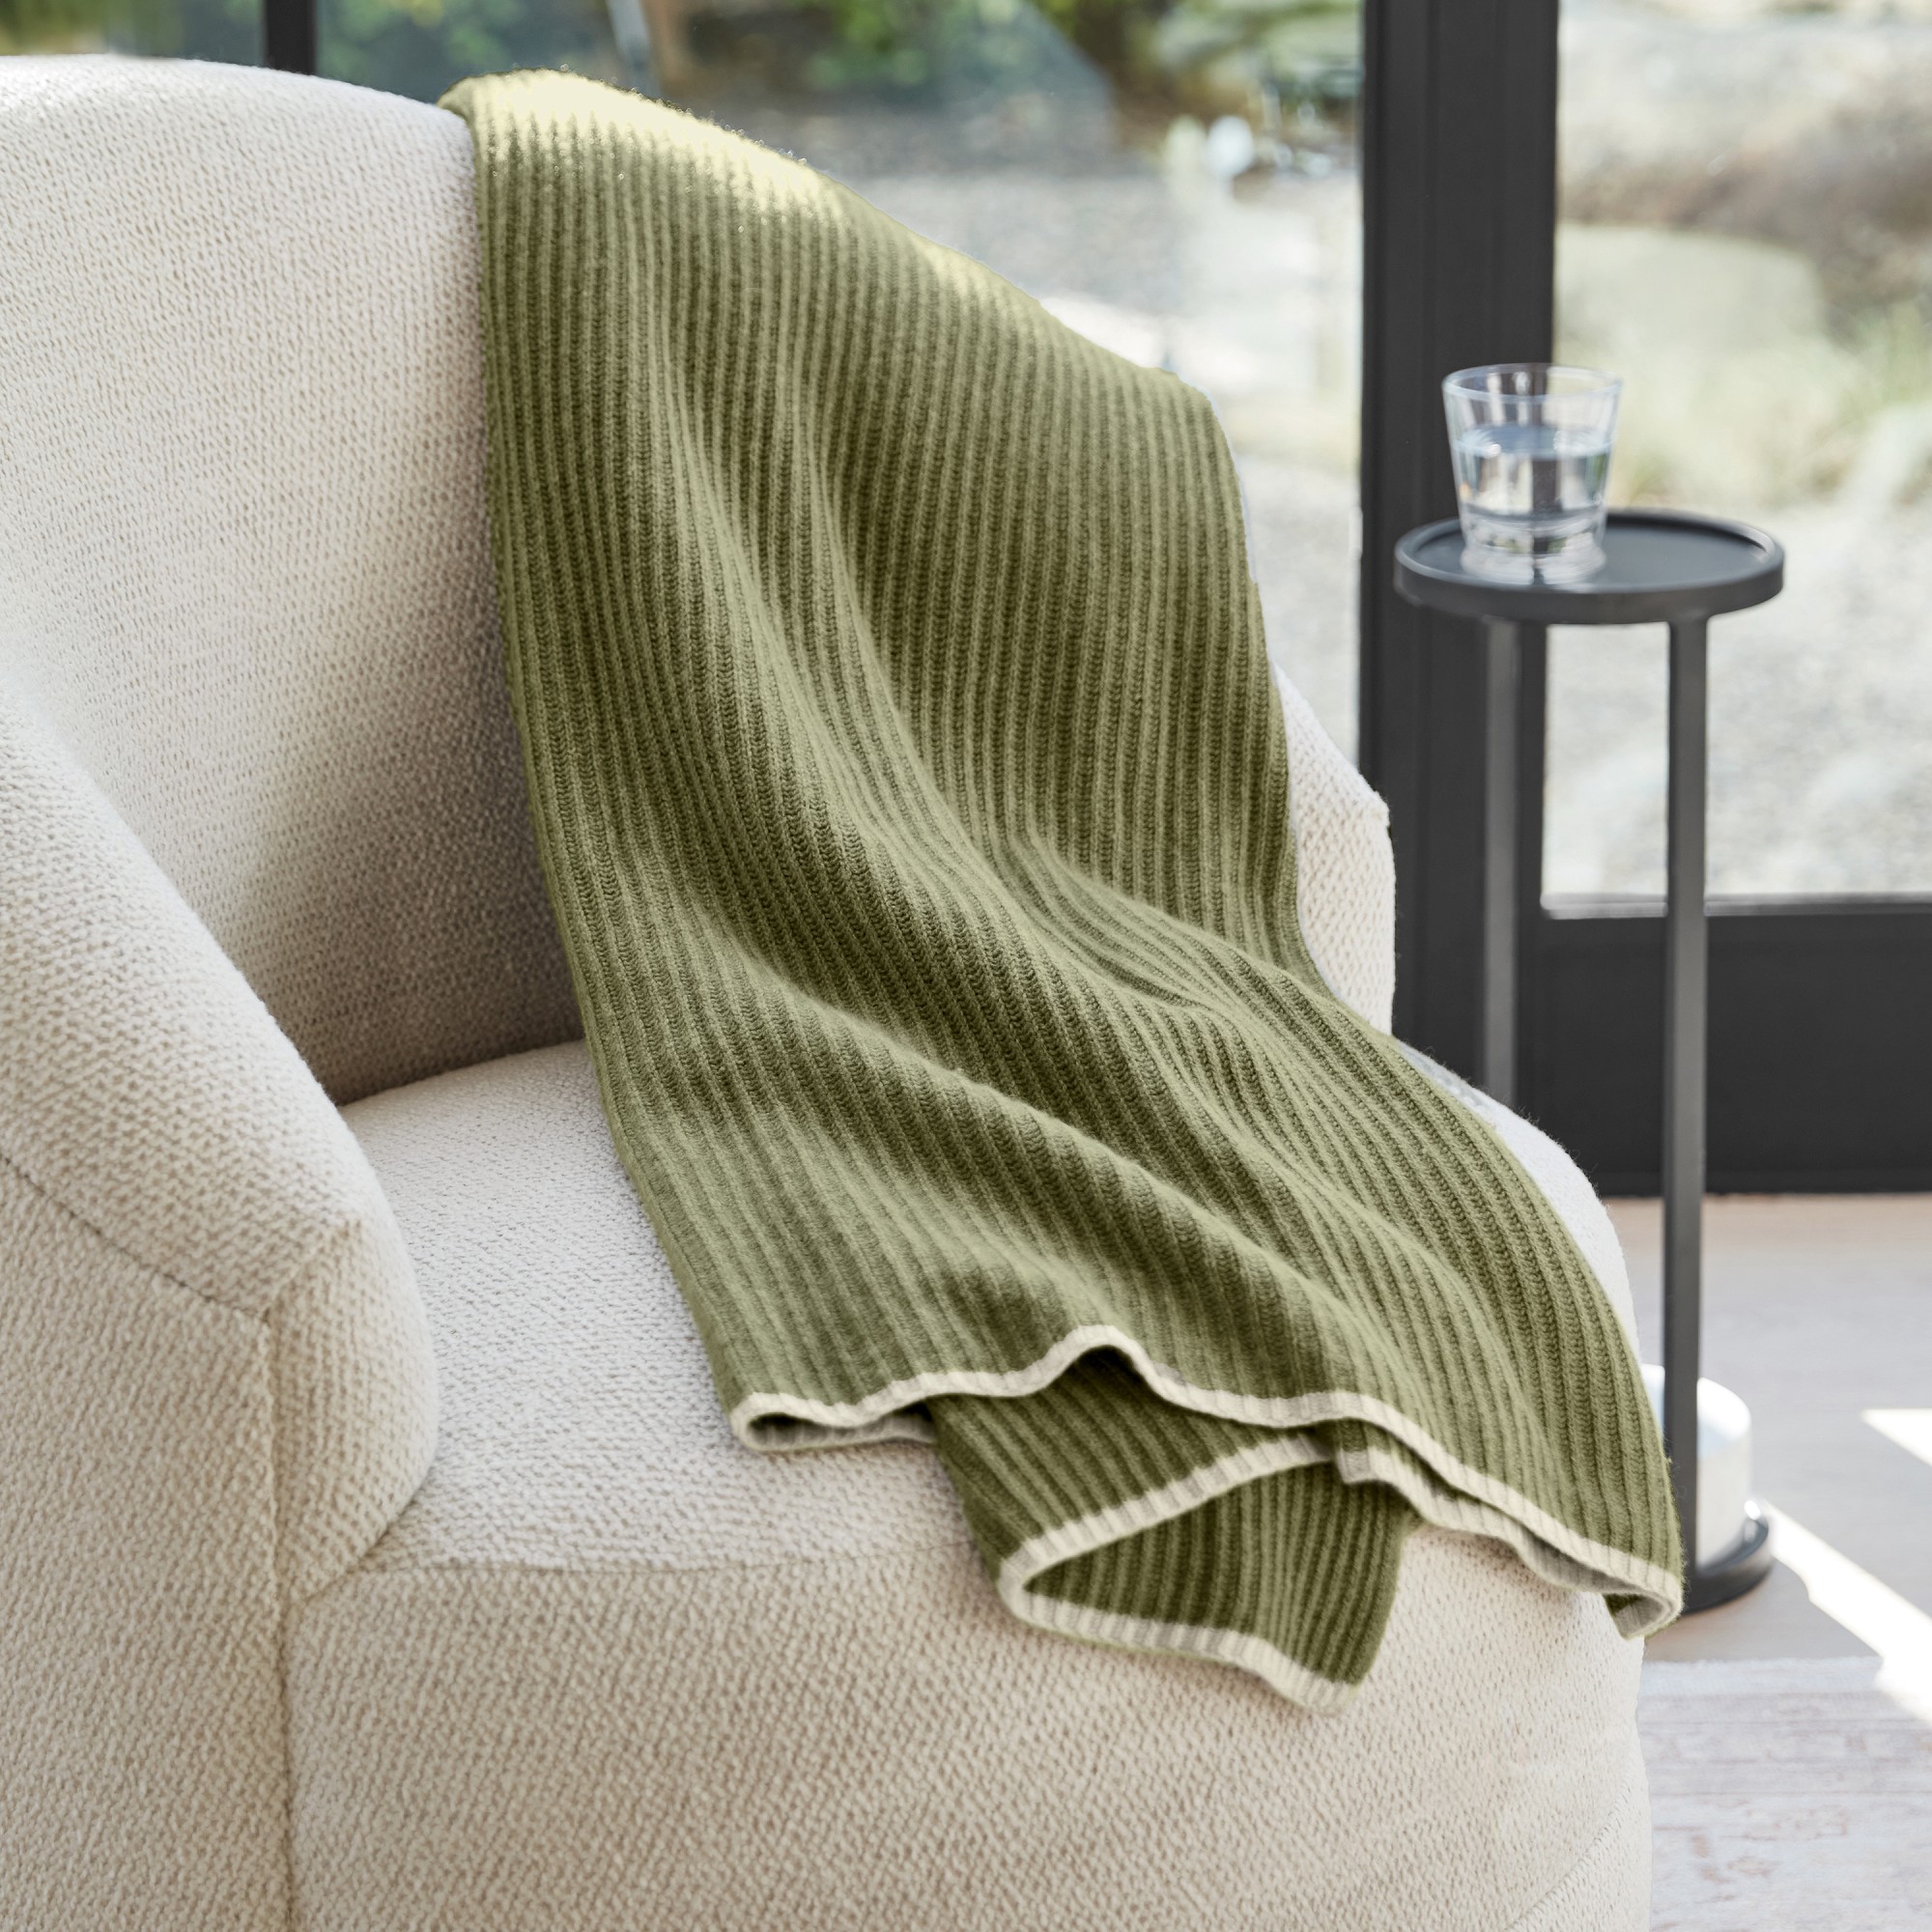 green cashmere throw over a white chair. 